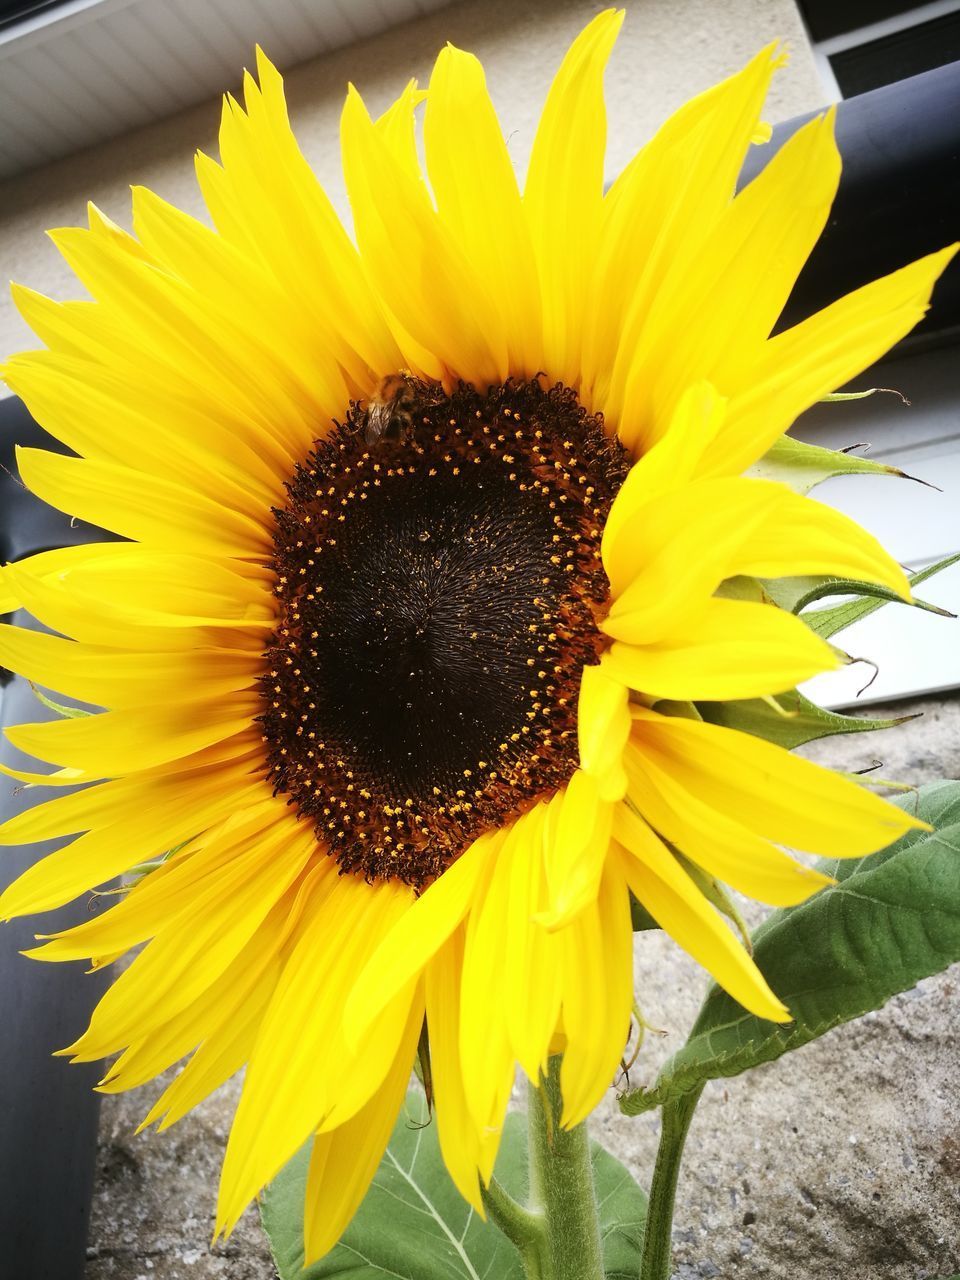 CLOSE-UP OF SUNFLOWERS ON YELLOW FLOWER